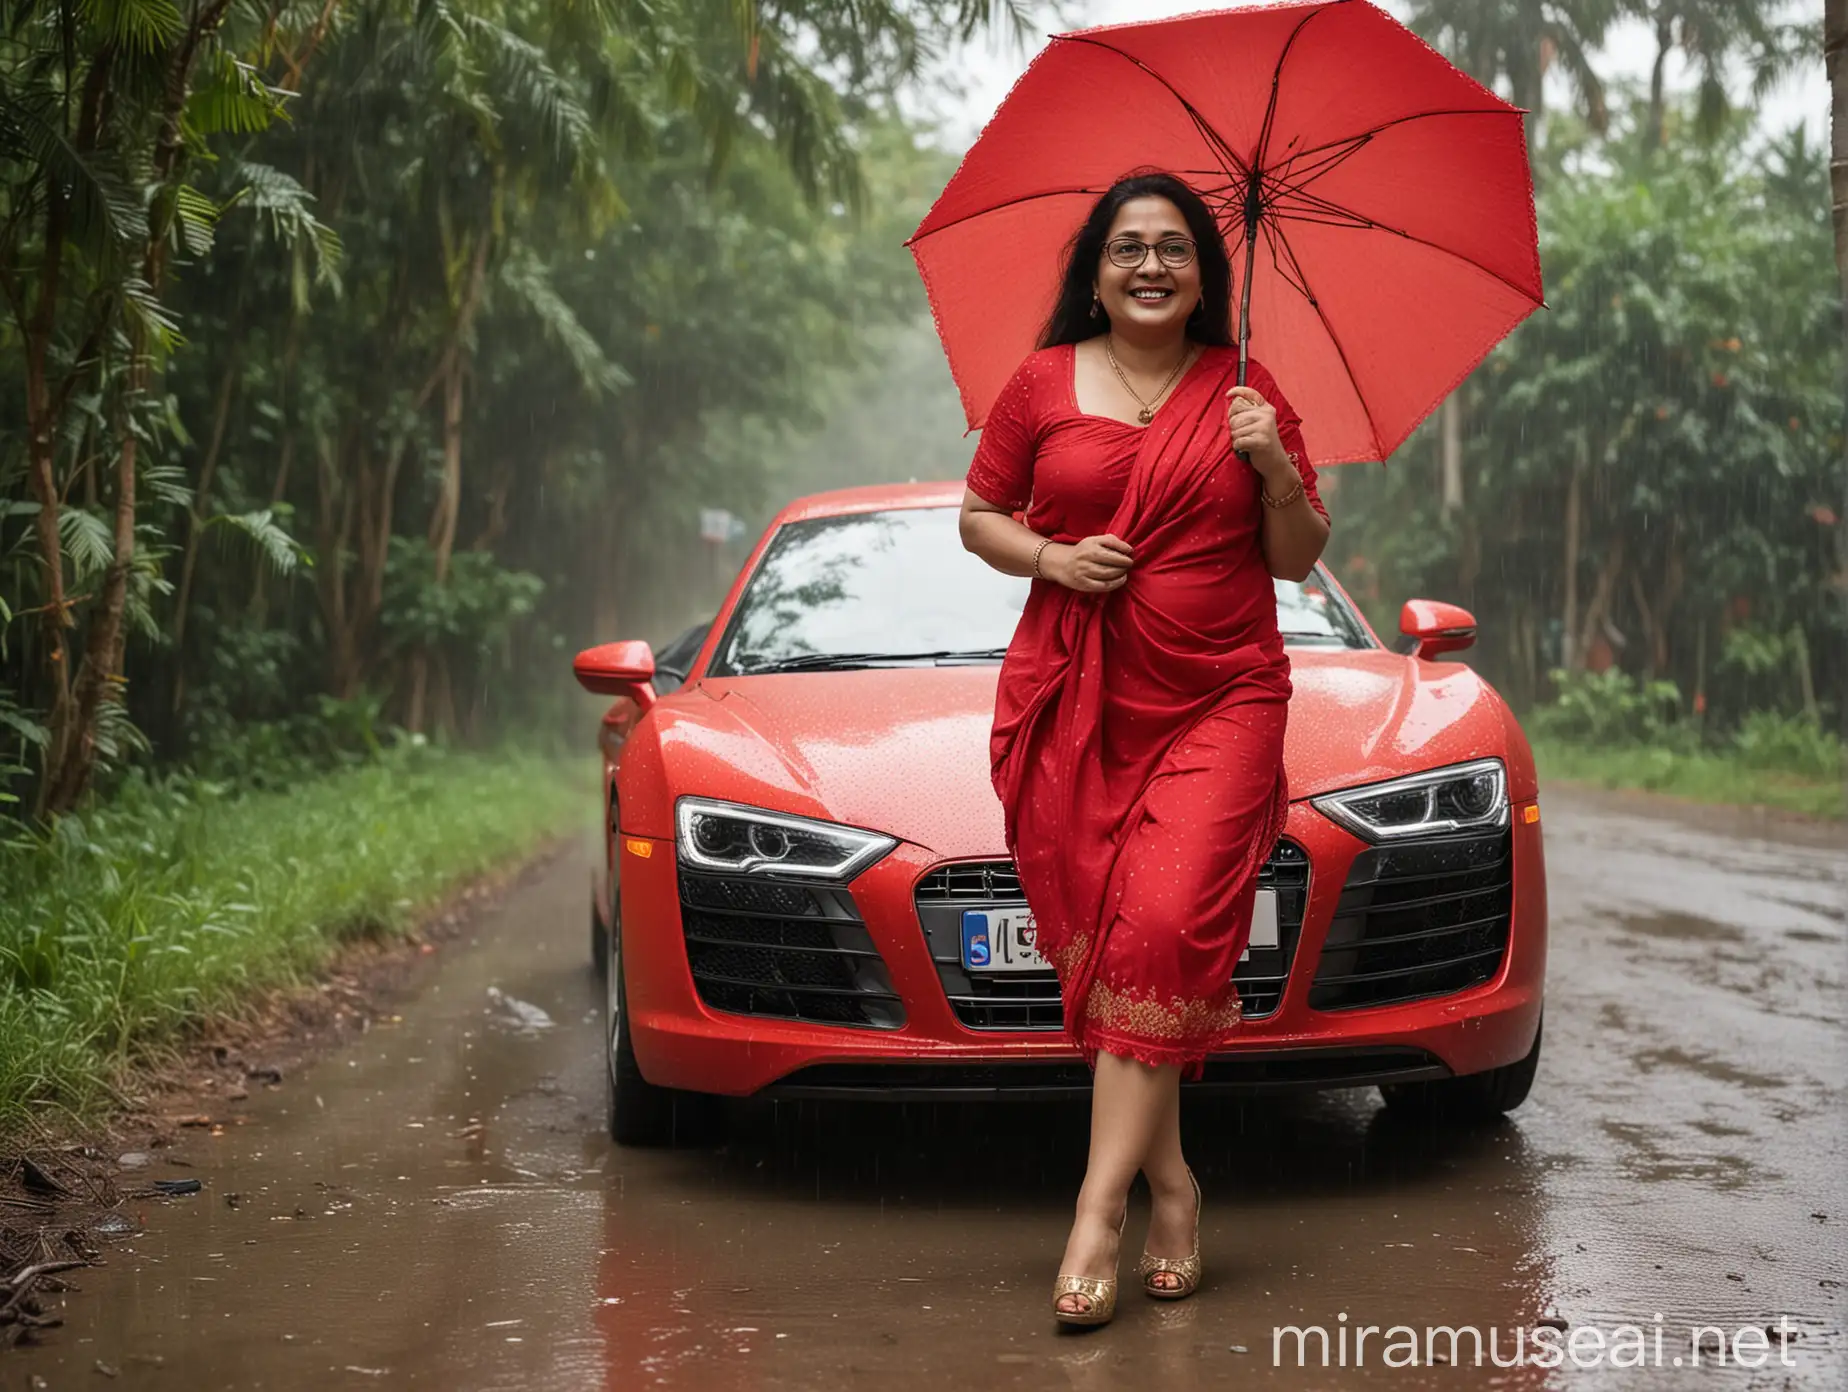 Happy Mature Curvy Aunty Laughing with Red Audi R8 in Rainy Outdoor Scene